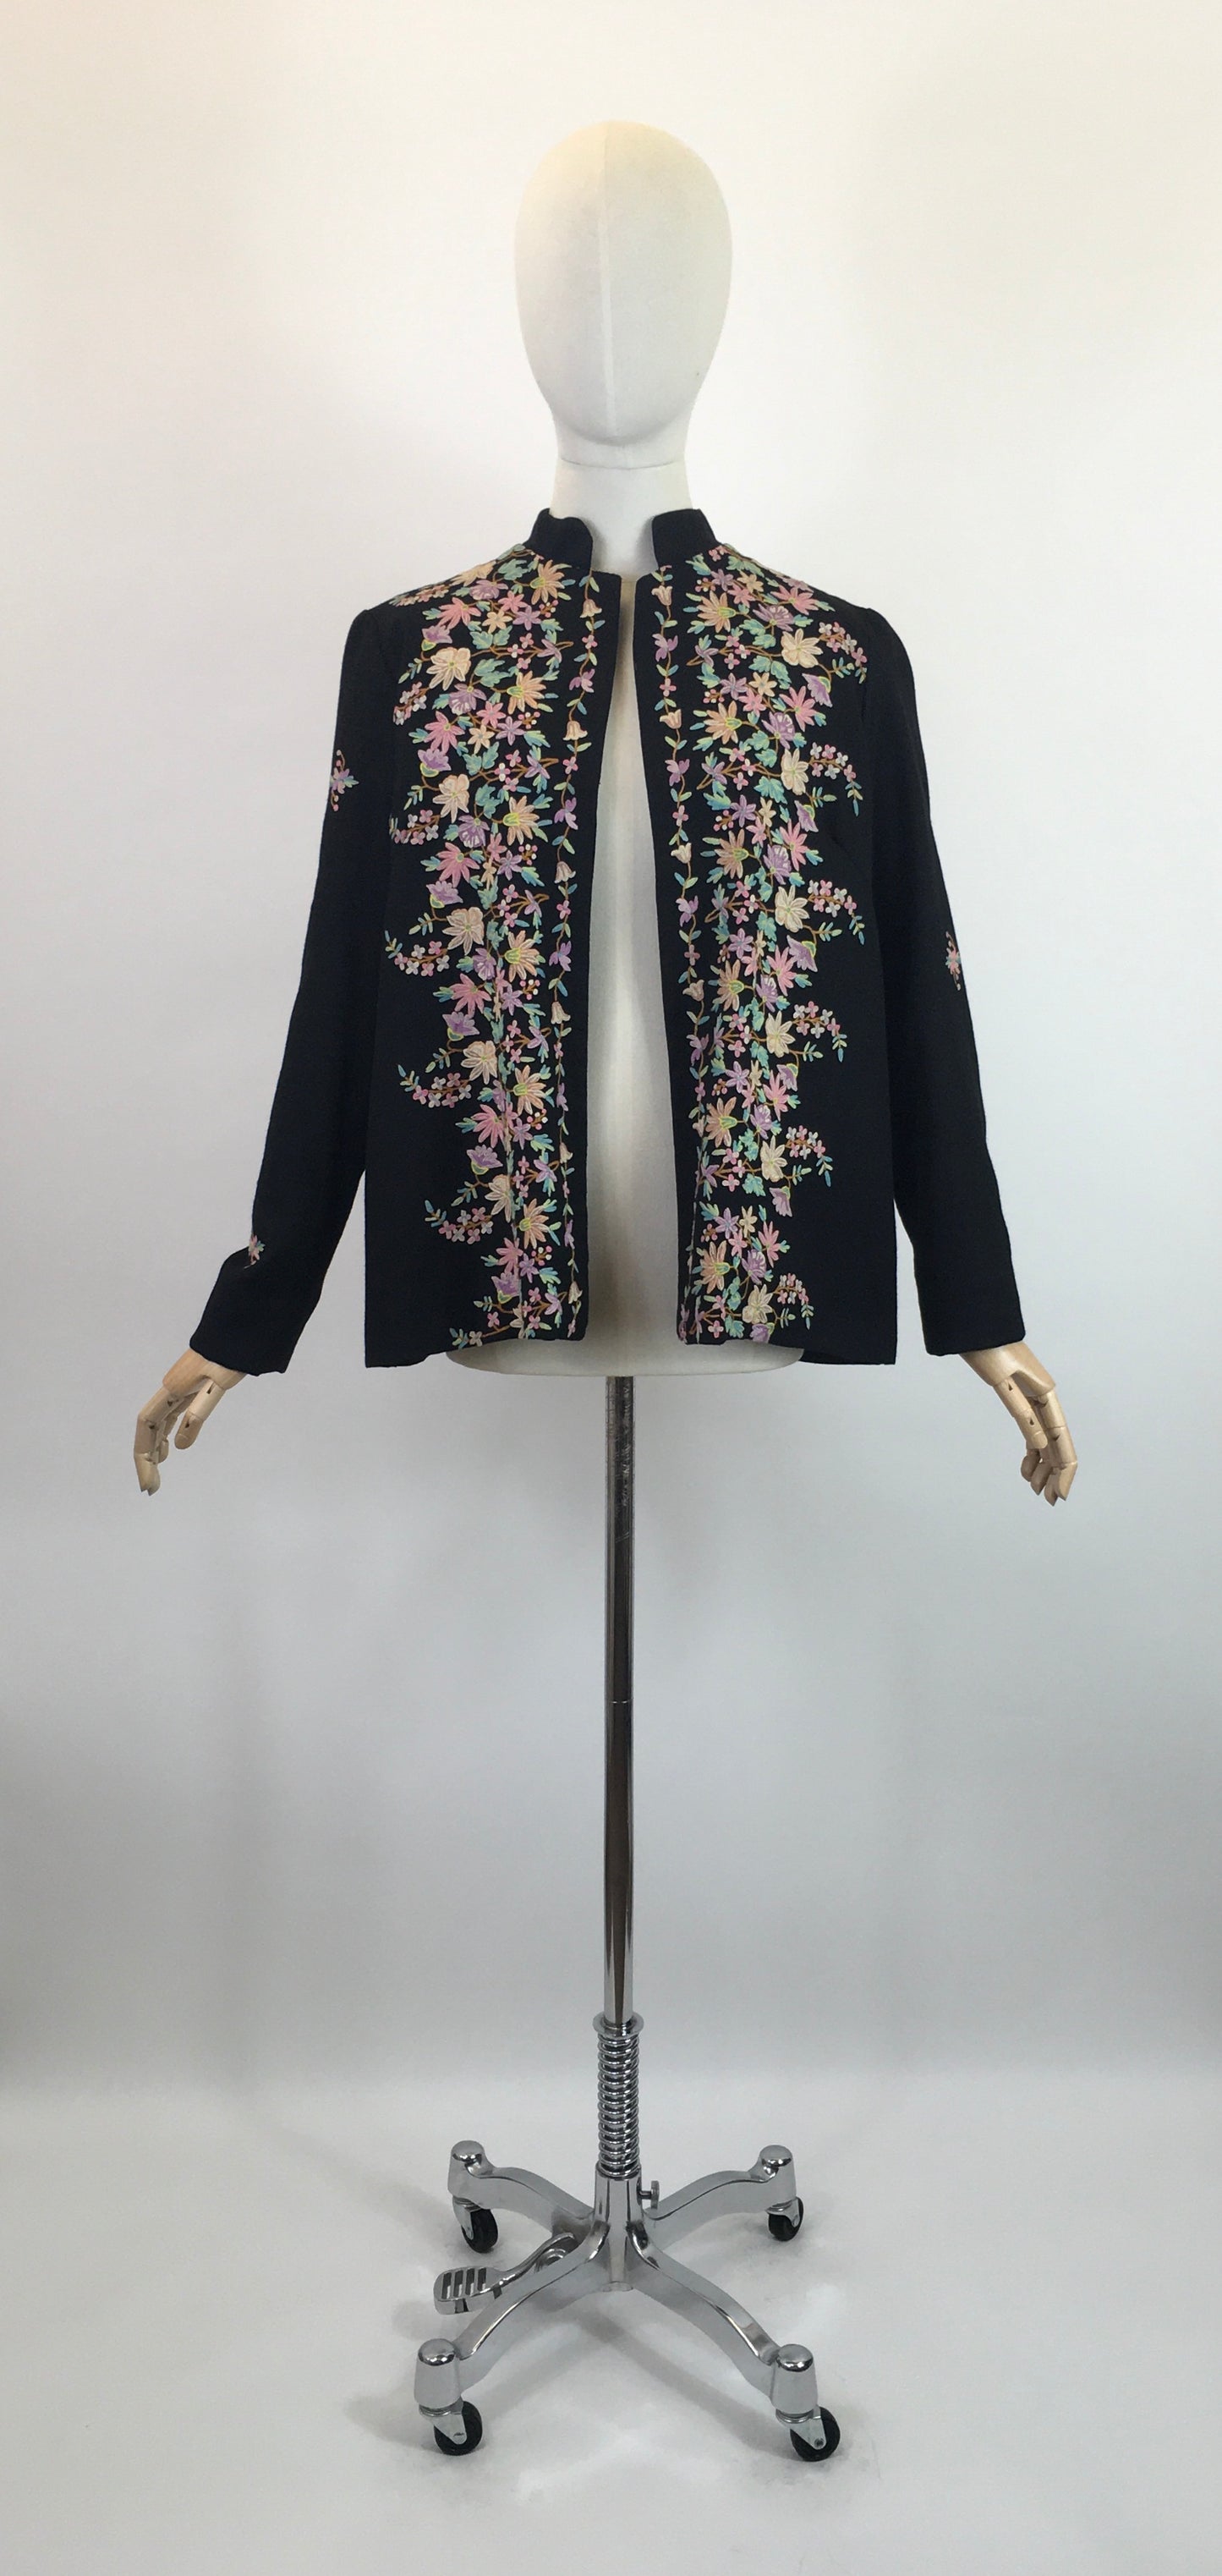 Original Late 1930's Early 1940's Edge to Edge Jacket - With Exquisite Embroidery Detailing in Pastels